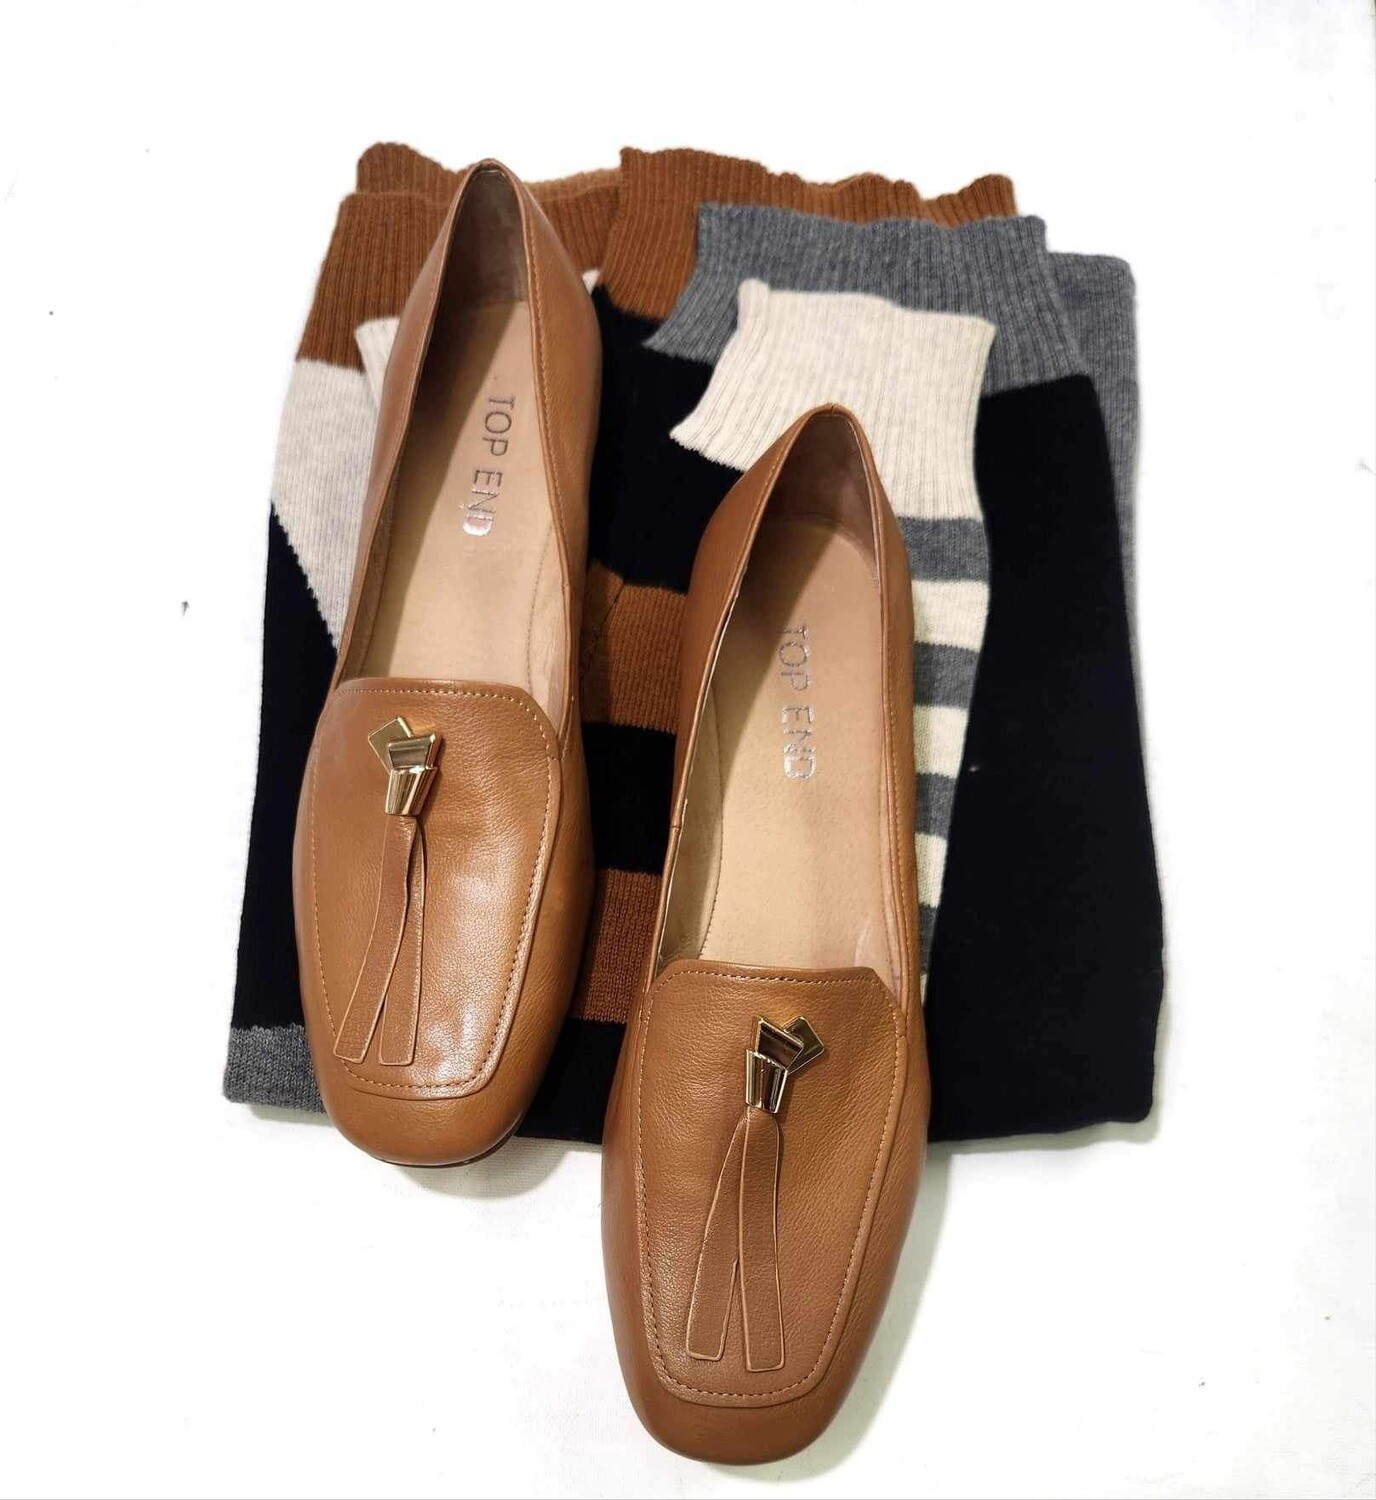 MARCELO LEATHER LOAFER - TAN, Size: 37